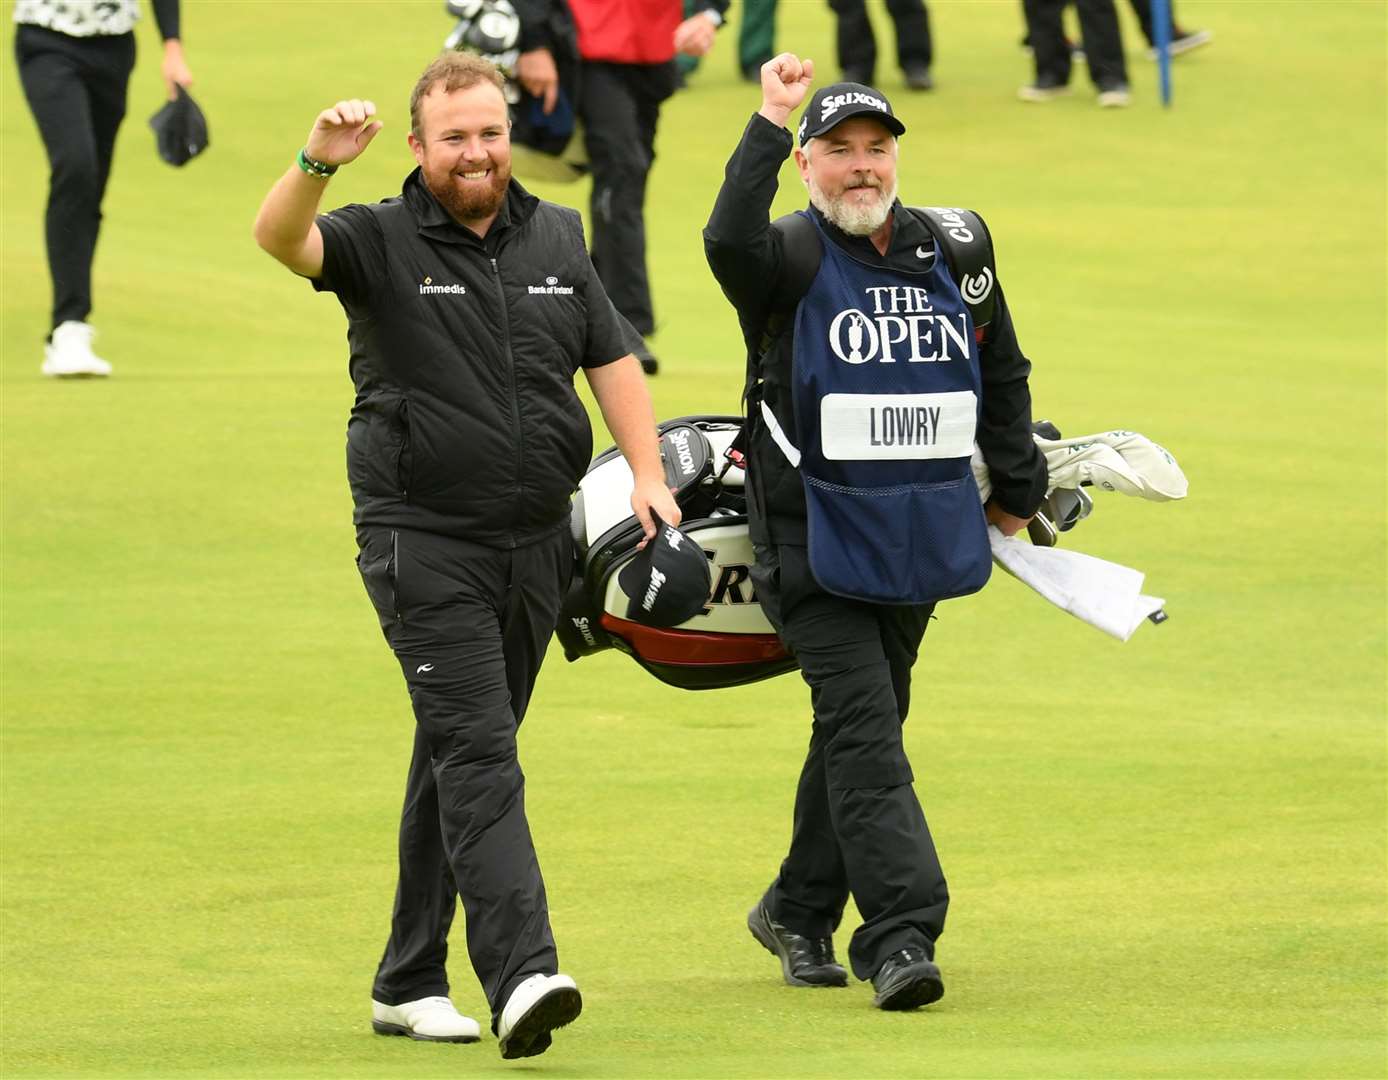 Shane Lowry and his caddie Bo Martin acknowledge the crowd as they approach the 18th green during the final round of the 148th Open in 2019. Picture: The R&A